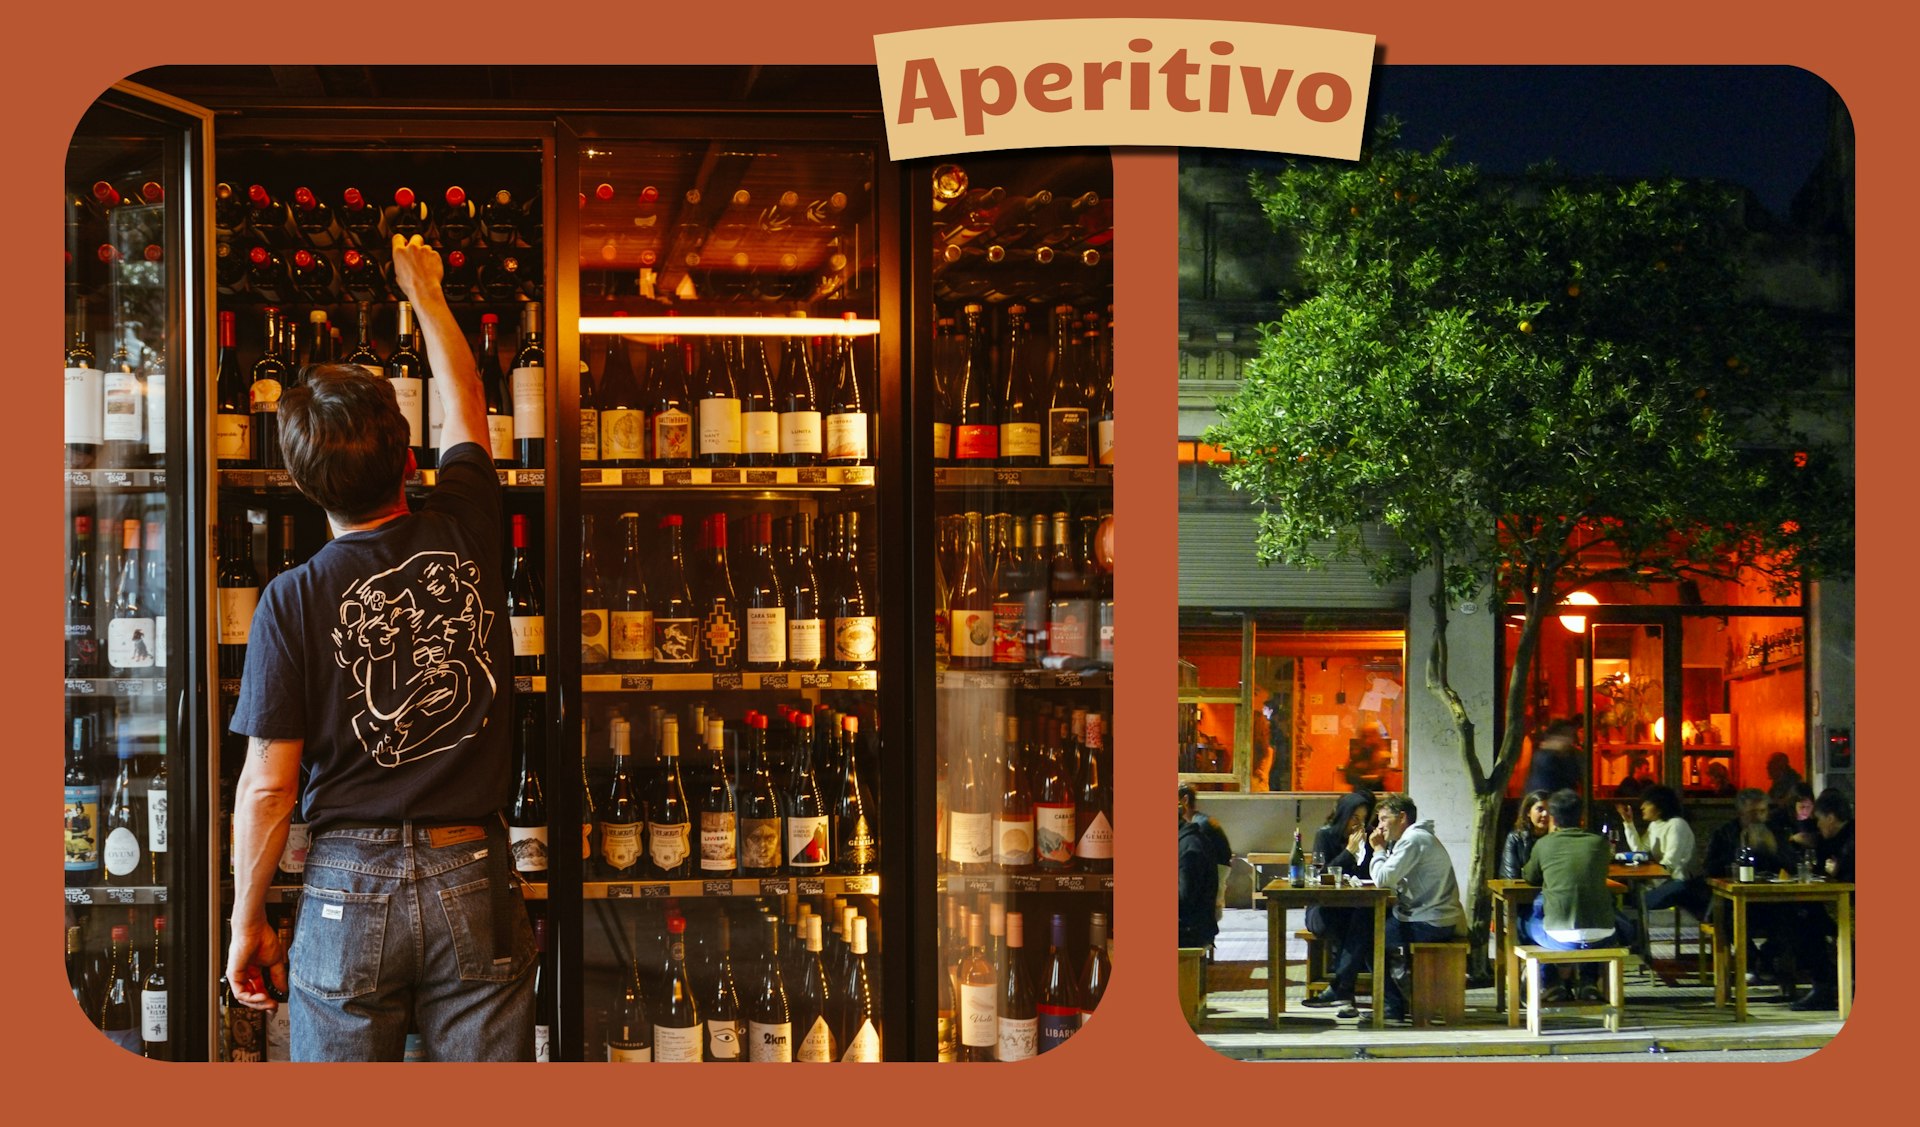 L: A man adds a bottle of wine to a shelf of wine in a Buenos Aires wine bar. R: People sit on benches on a bar terrace drinking wine